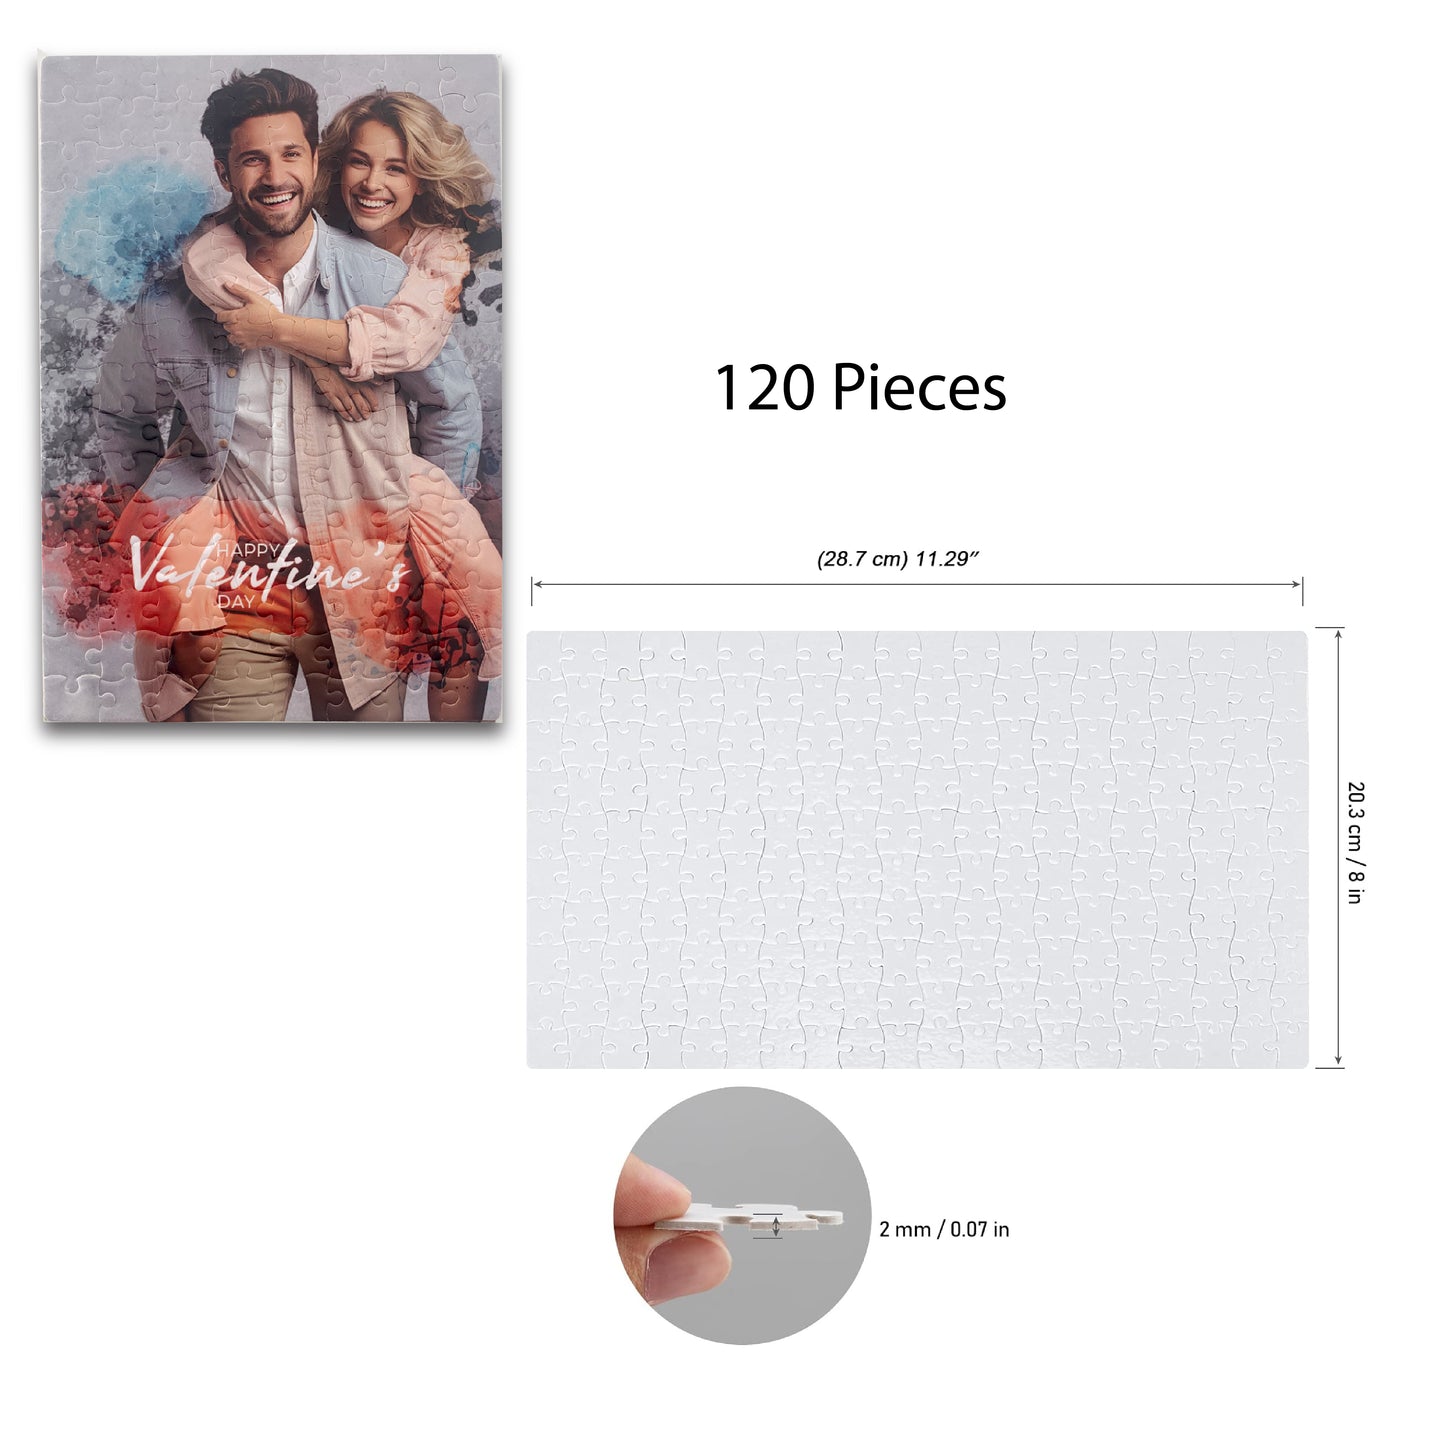 Personalized Photo Puzzle, Custom Jigsaw Puzzle with Your Image, Unique Gift Idea, Gift for Her, Gift for Him